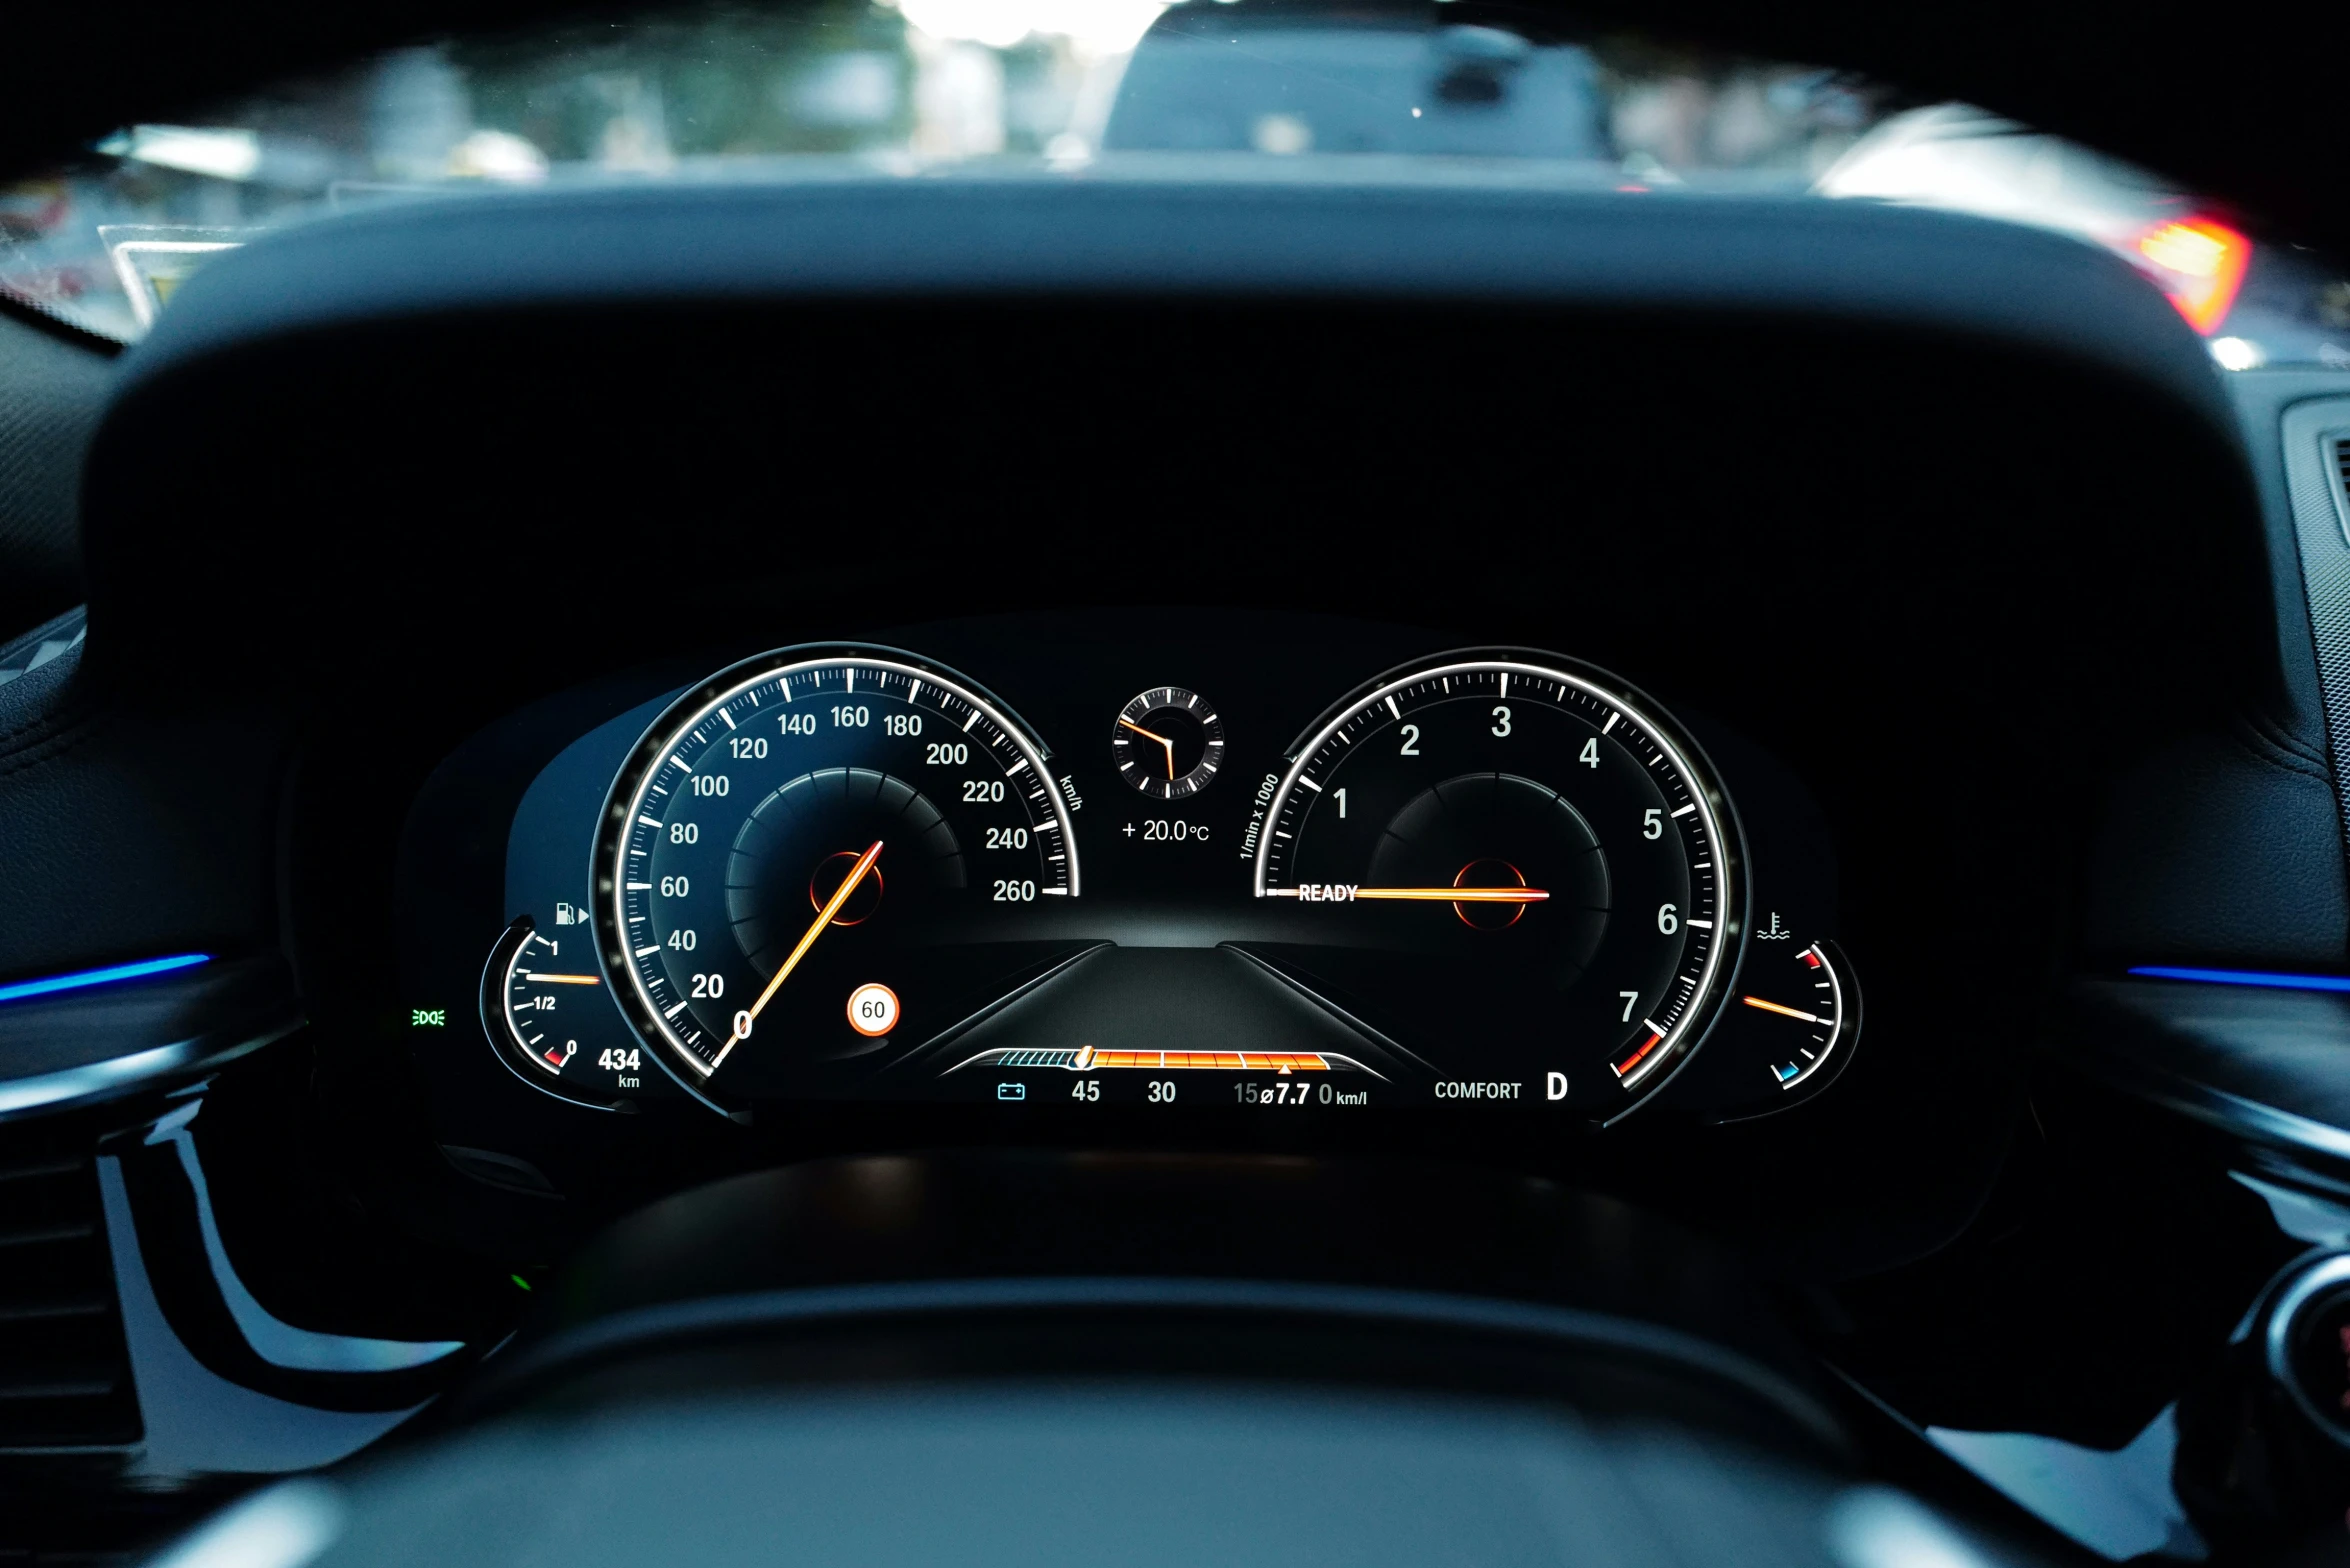 the dash light and meters on a car